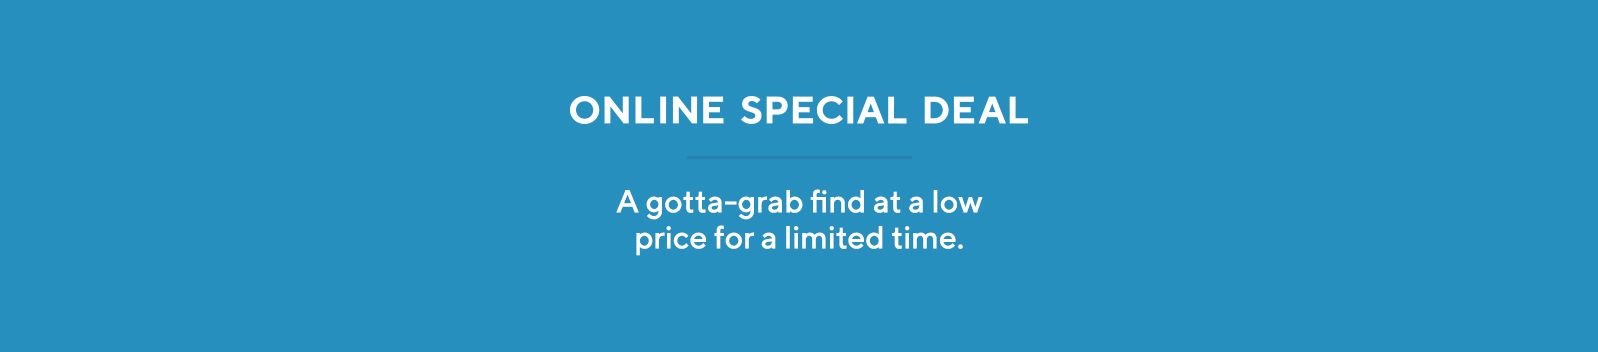 Online Special Deal: A gotta-grab find at a low price for a limited time.